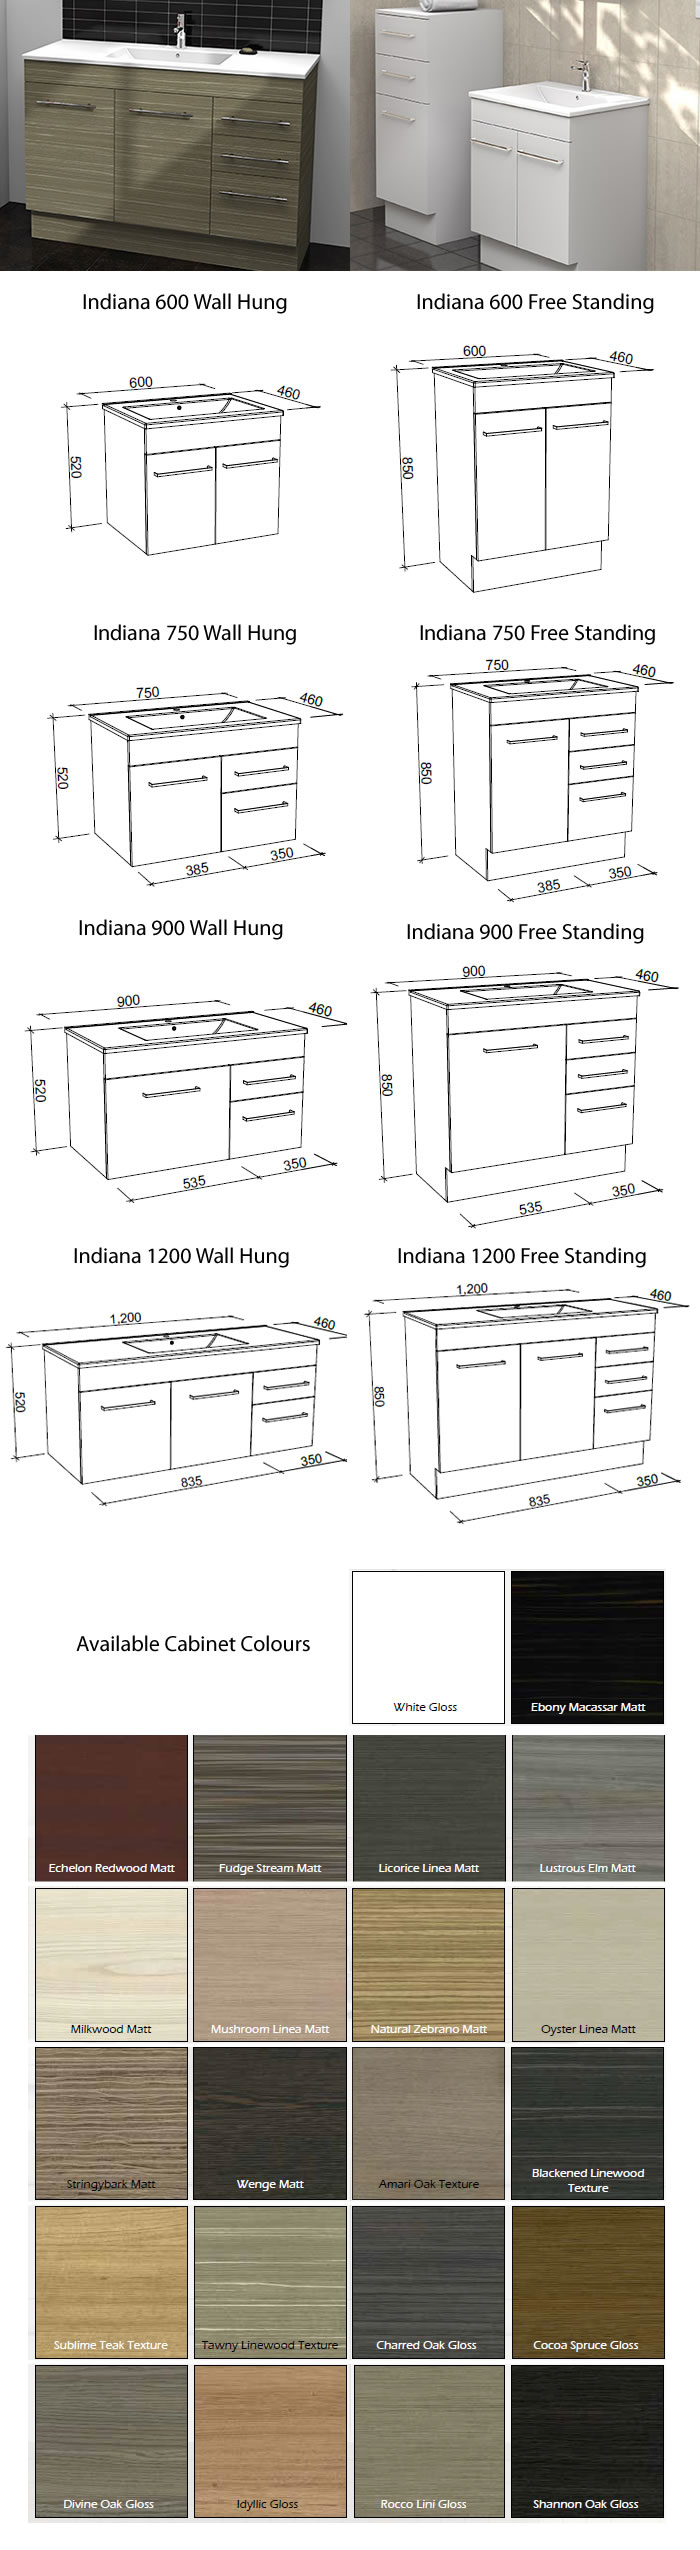 Timberline Indiana Vanity Cabinet specifications